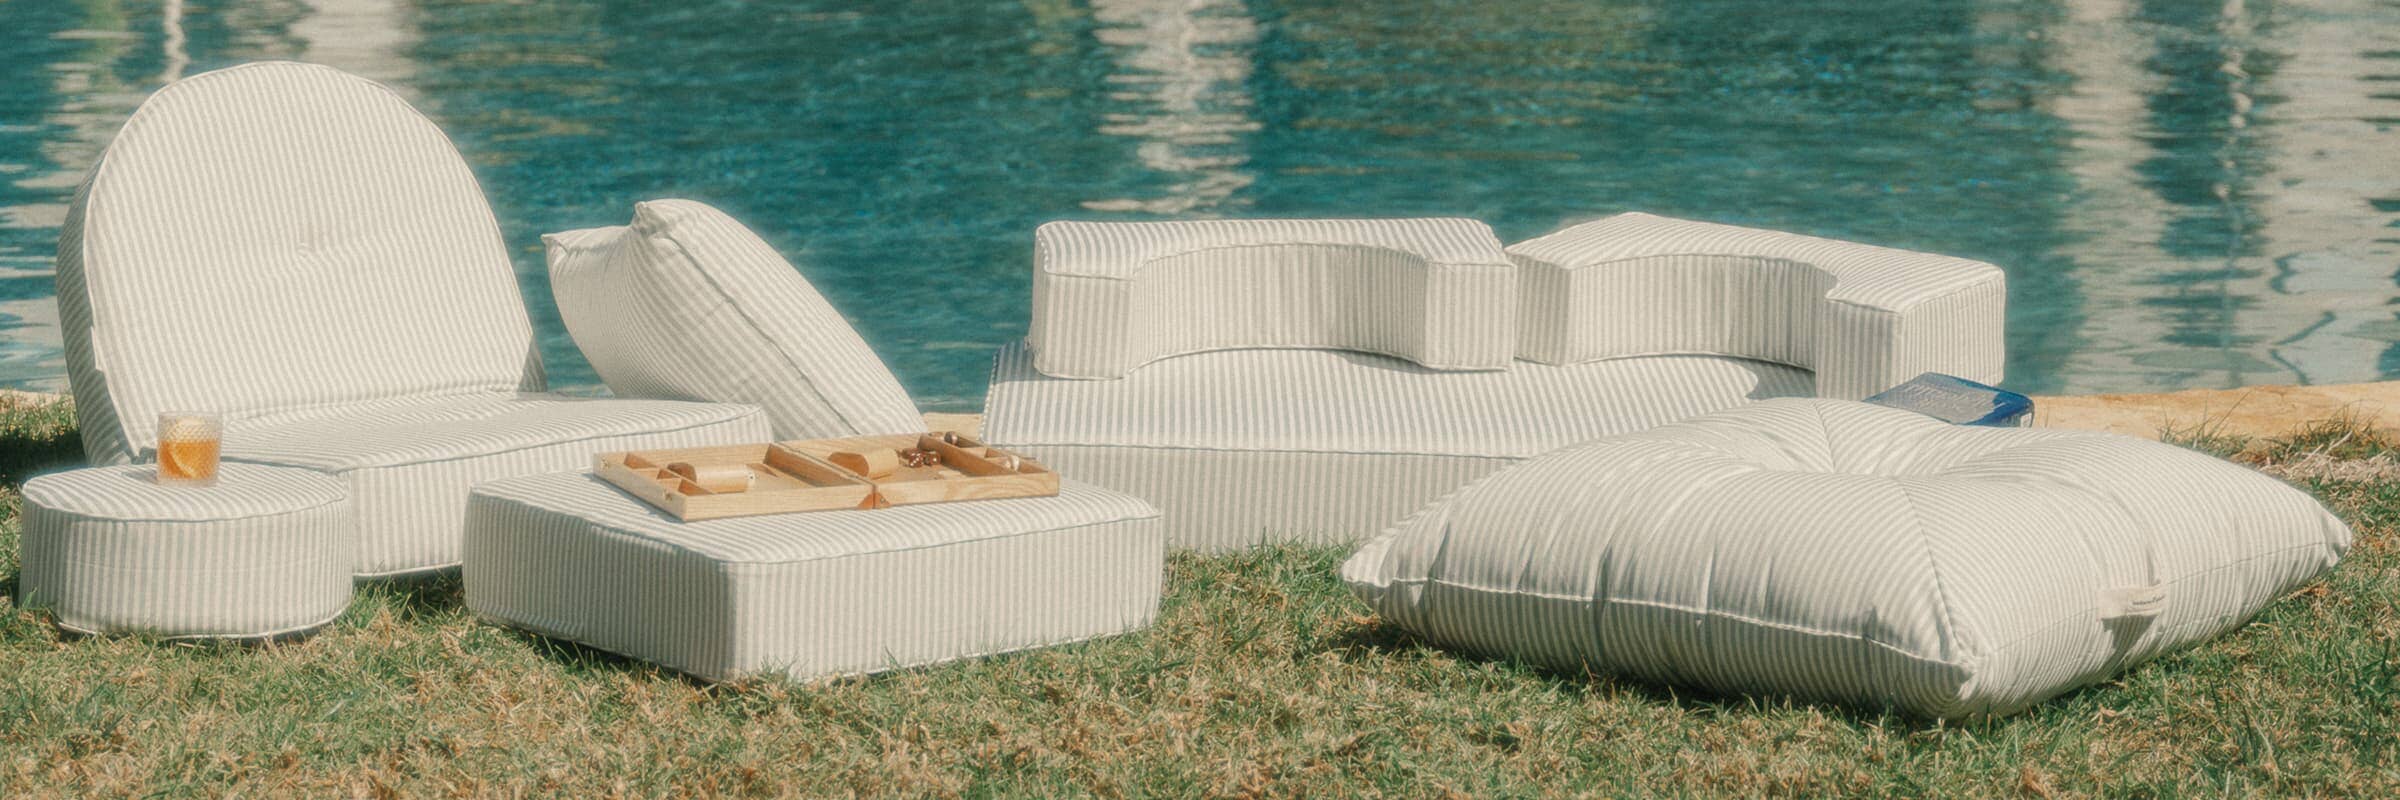 green striped outdoor cushions by a poolside